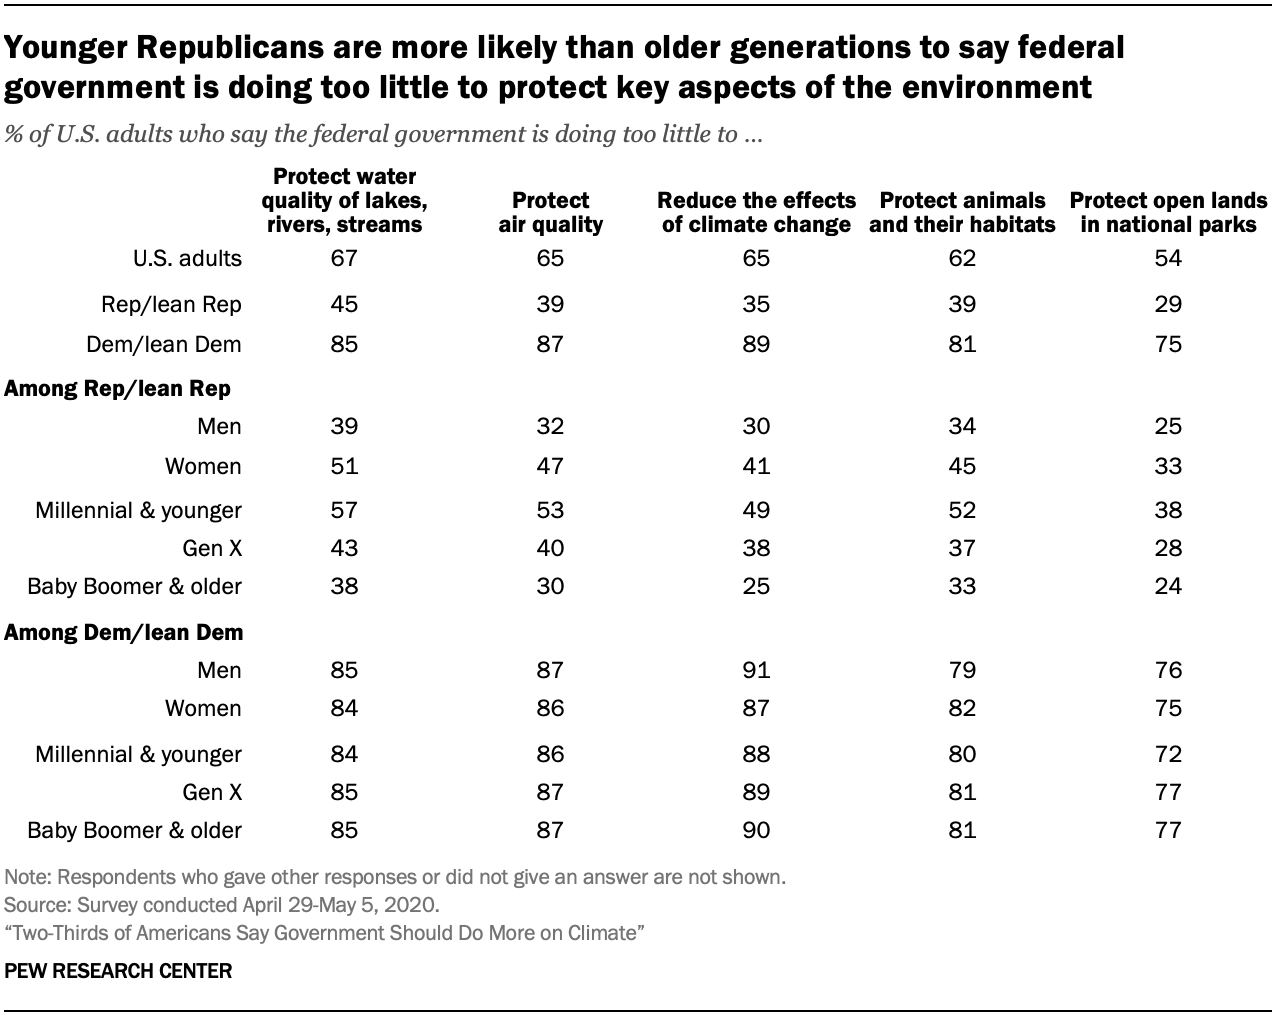 Chart shows younger Republicans are more likely than older generations to say federal government is doing too little to protect key aspects of the environment